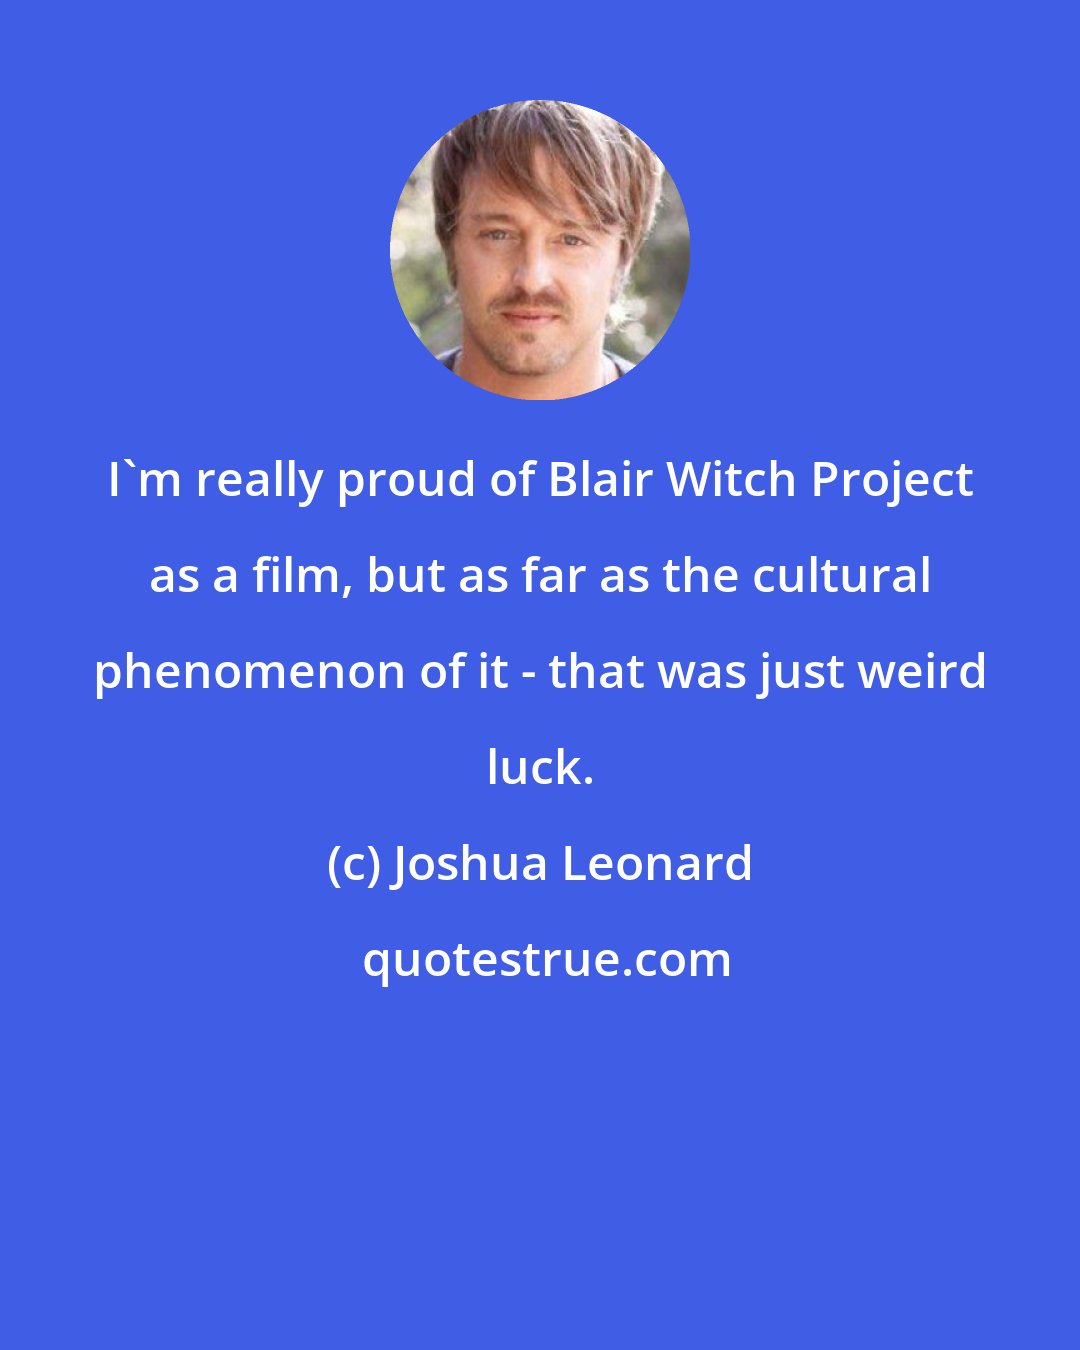 Joshua Leonard: I'm really proud of Blair Witch Project as a film, but as far as the cultural phenomenon of it - that was just weird luck.